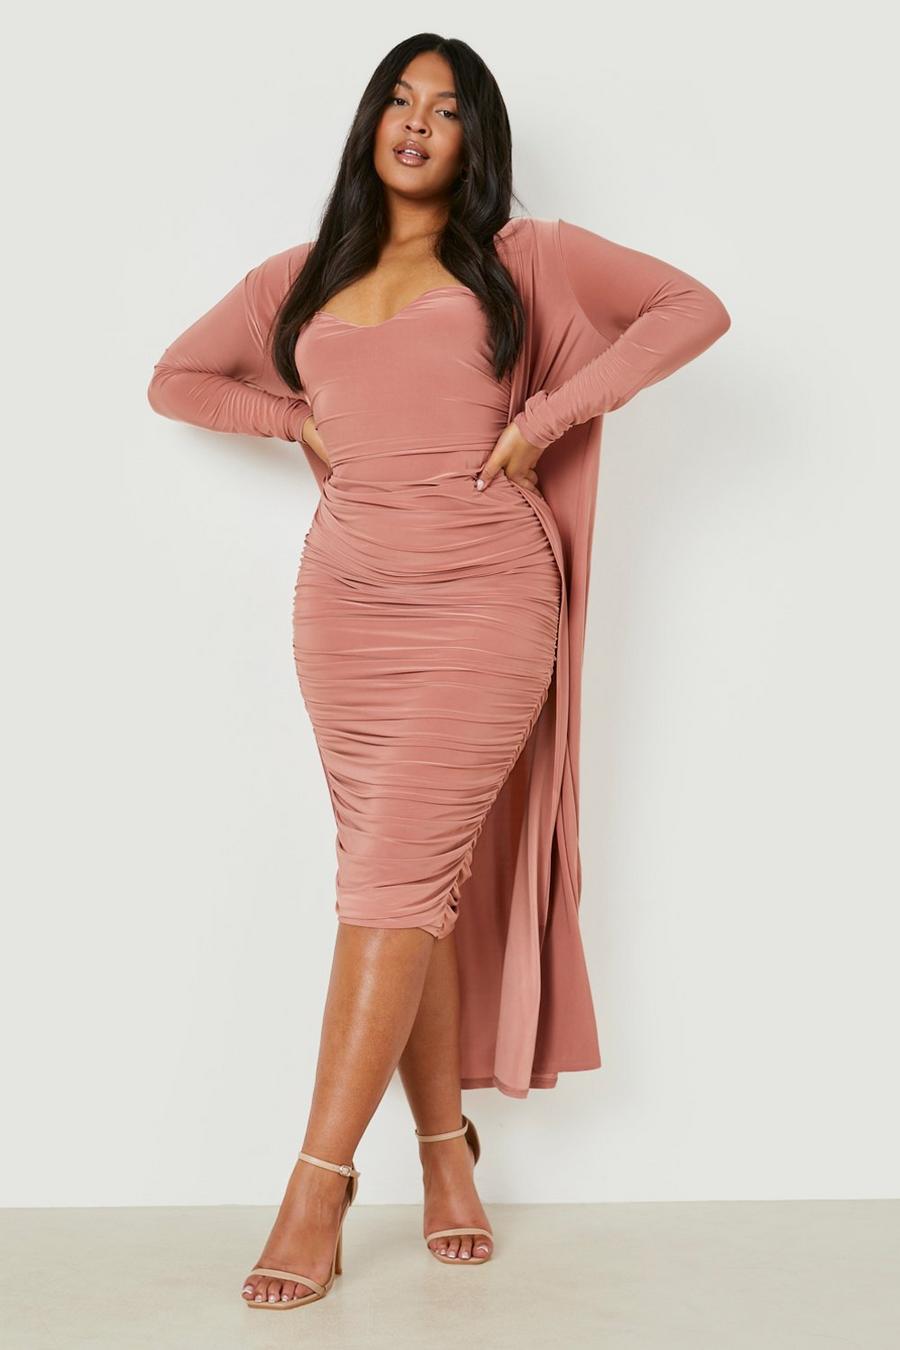 Plus Size Party Outfits, Plus Size Birthday Outfits